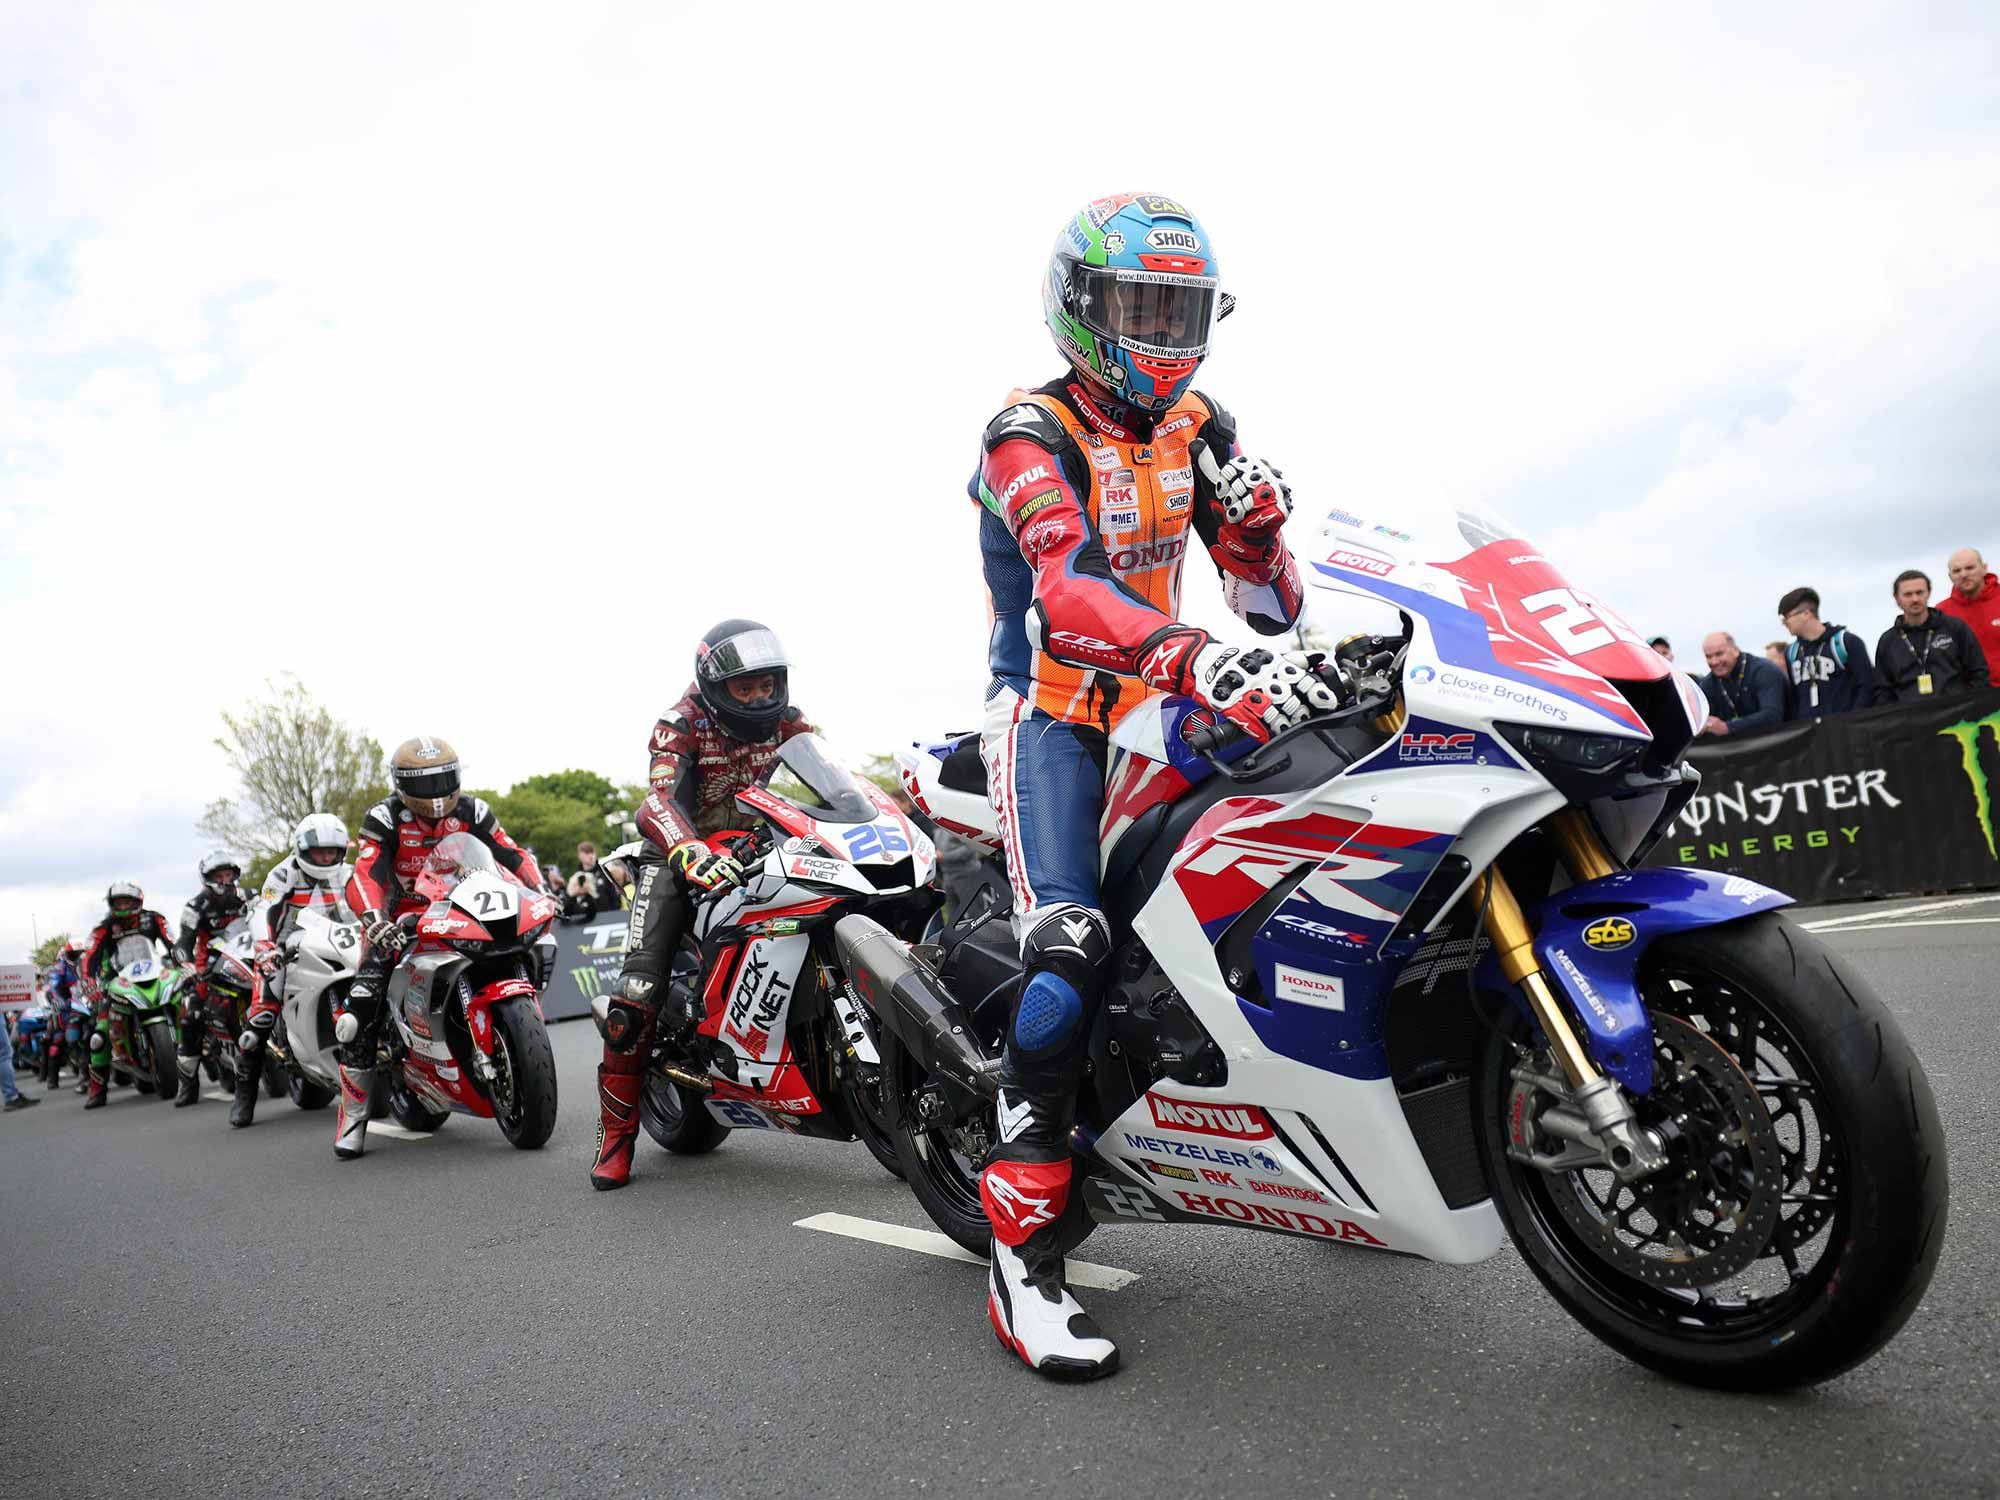 Racing at the Isle of Man kicks off this weekend, and for the first time fans can watch all the action live.